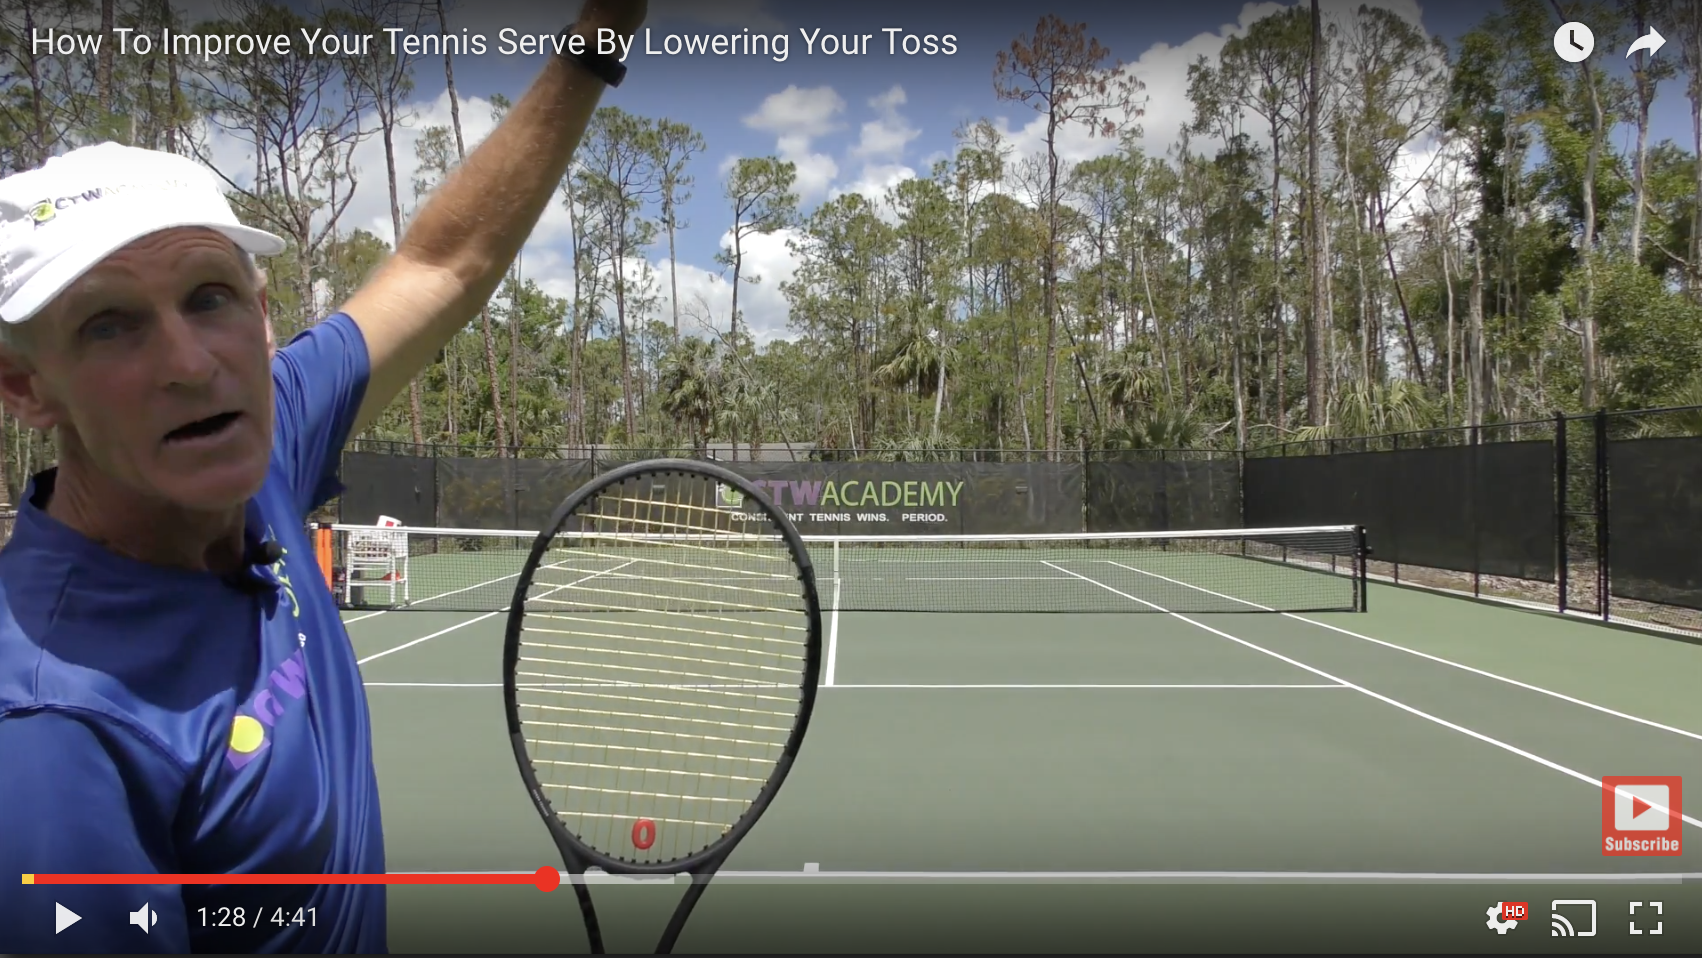 How To Improve Your Tennis Serve By Lowering Your Toss